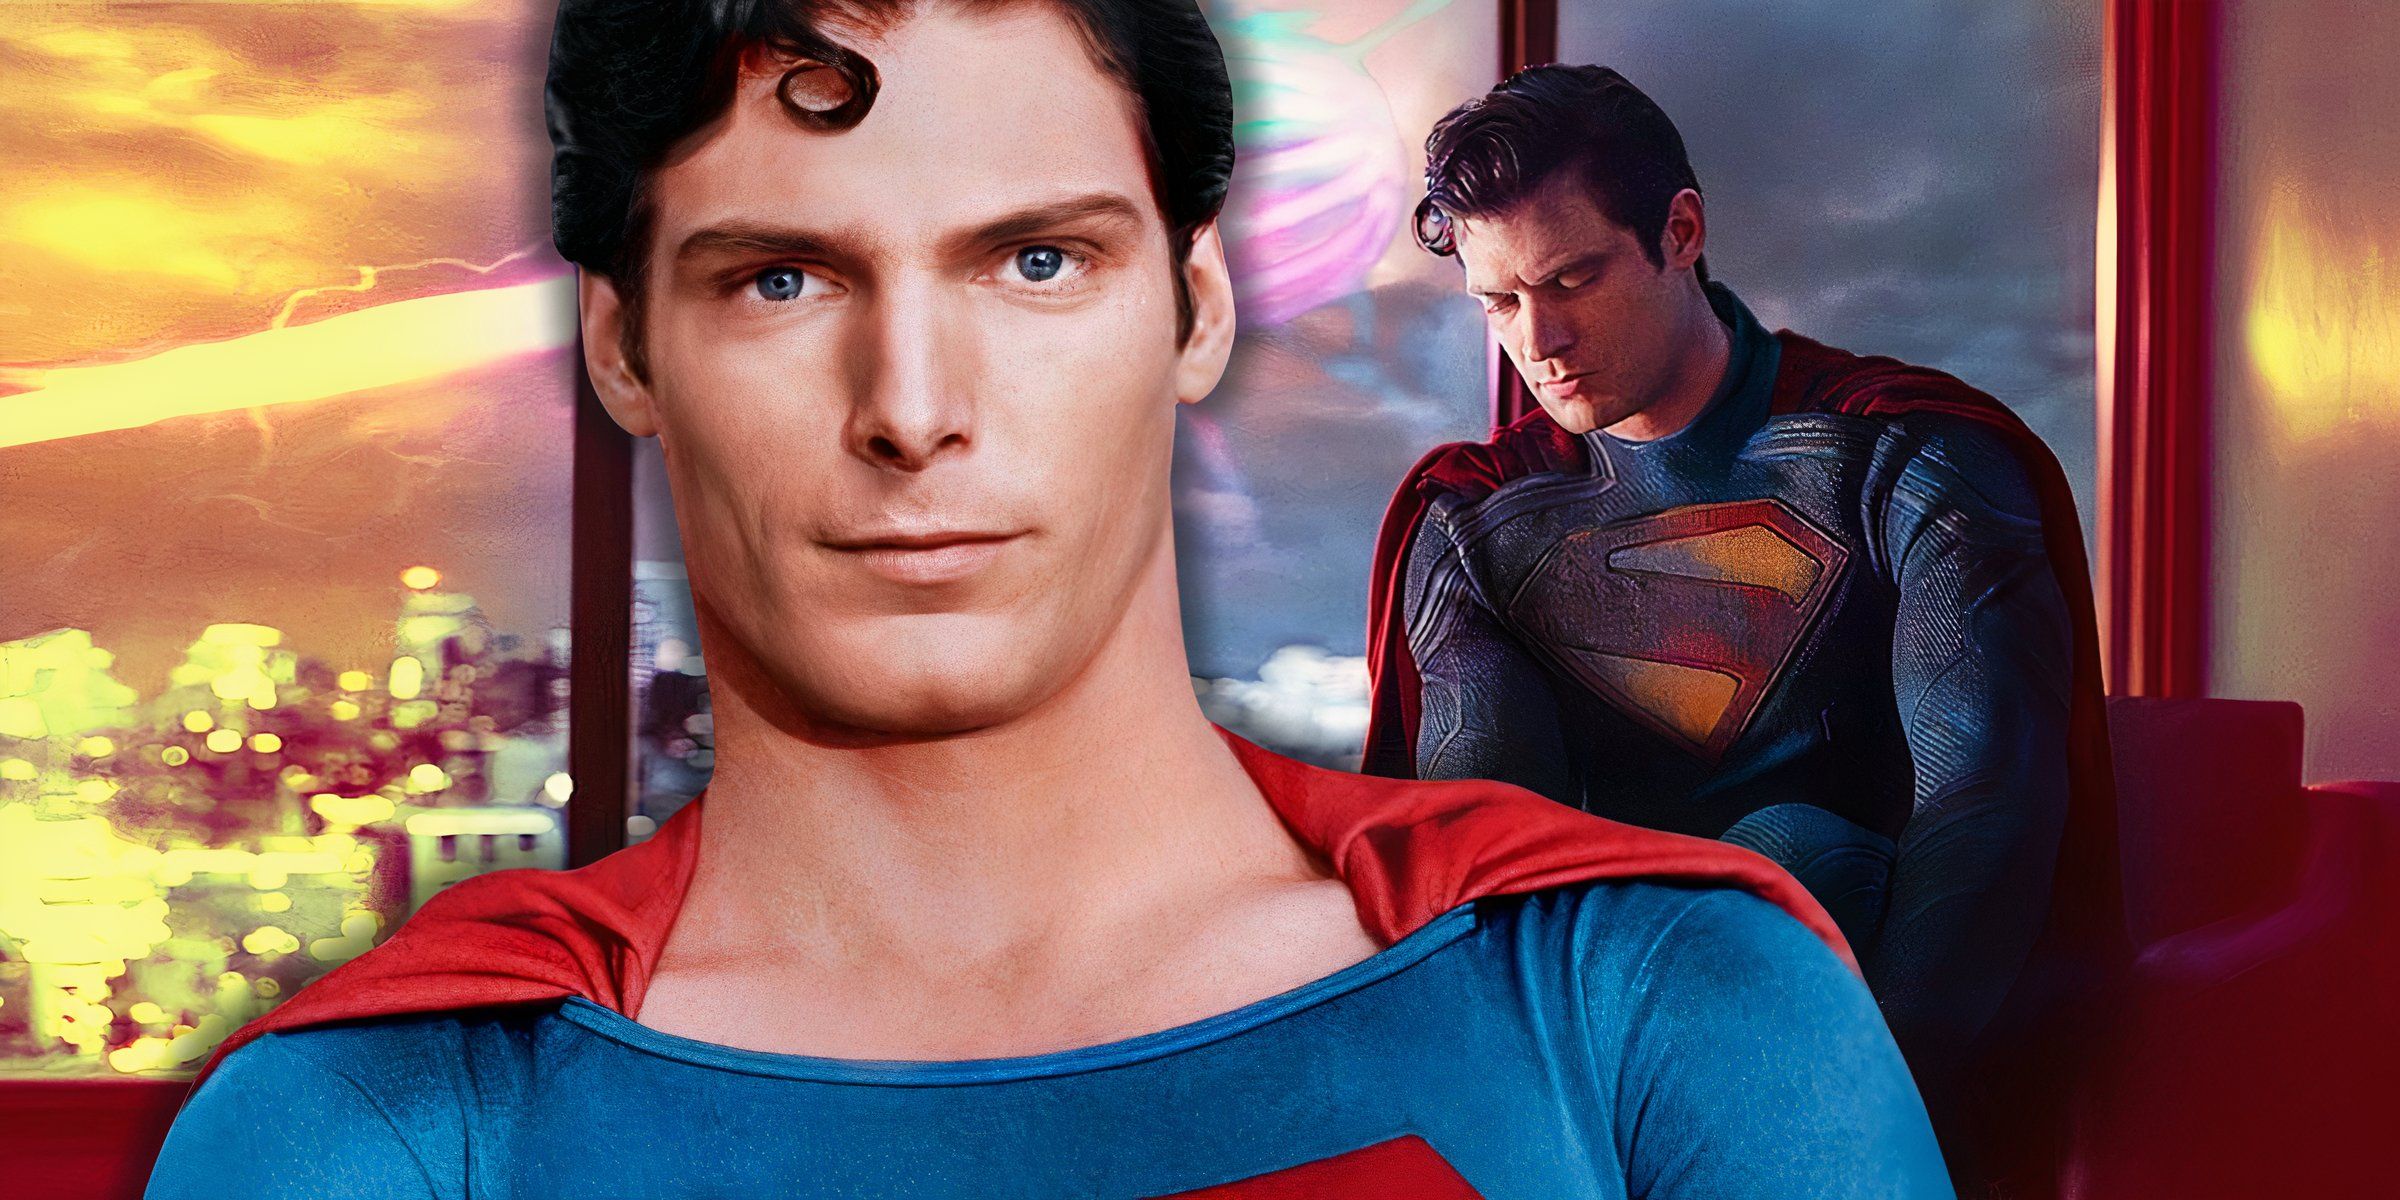 Christopher Reeve Gets A Better Tribute In James Gunn’s Superman Movie Following The Flash CGI Cameo Controversy With New Casting